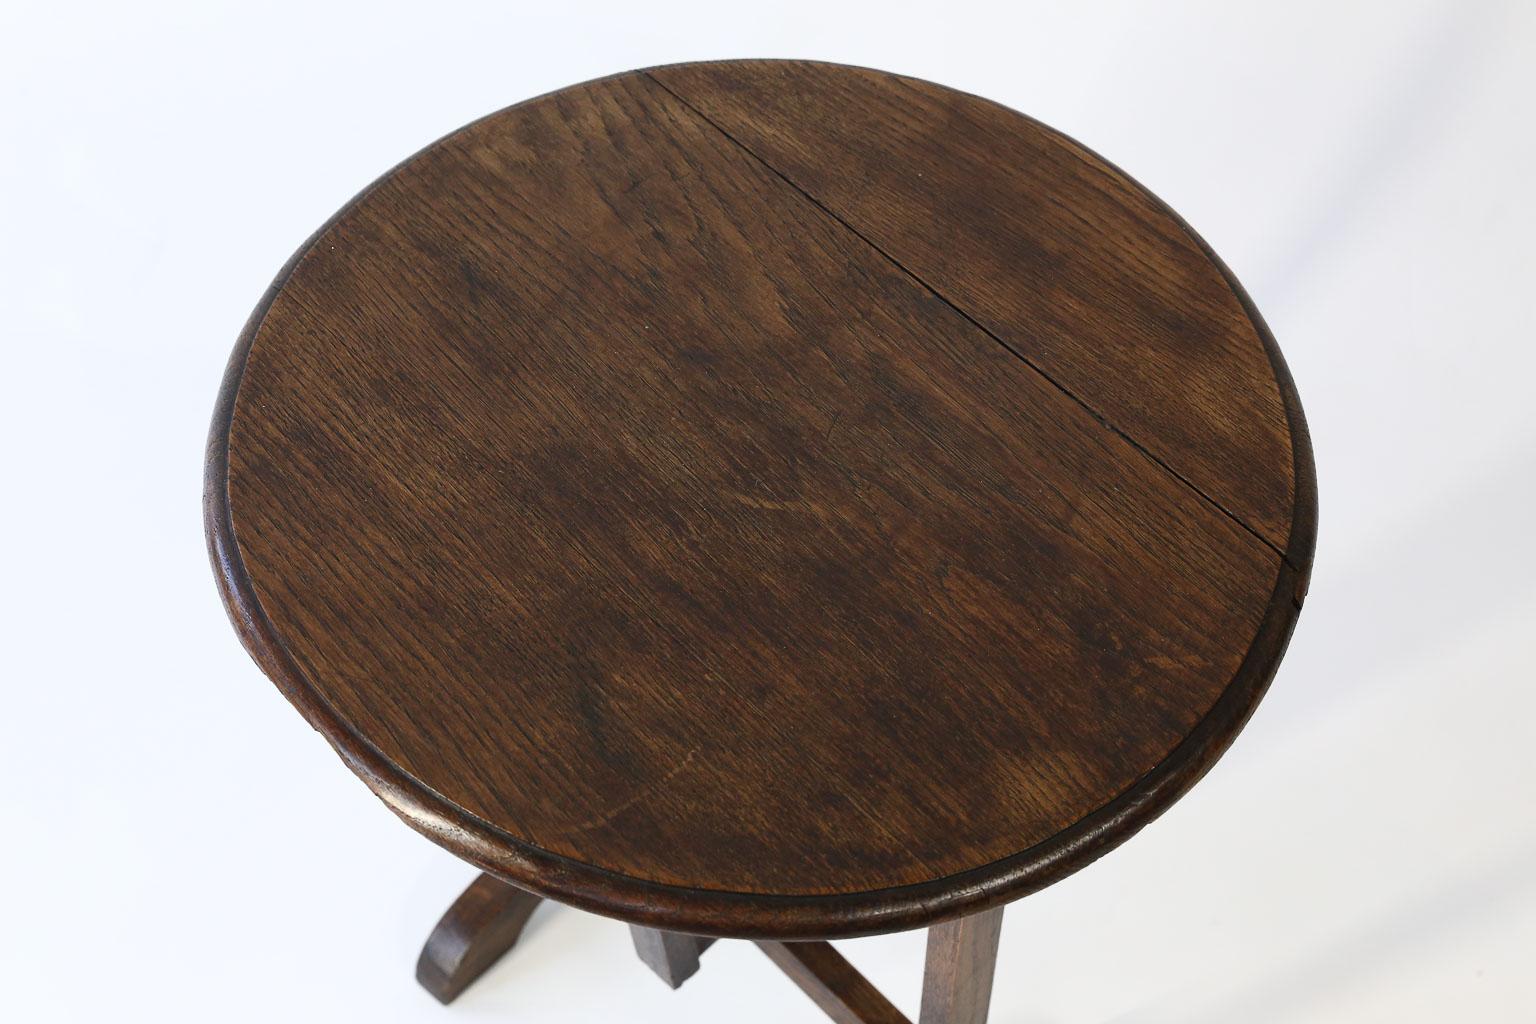 A lovely petite French wine tasting table. Also known as a vendange or vigneron table, these tables were used in the vineyards of France for tasting wine and enjoying meals. The table would make a great side or drinks table. It features a round